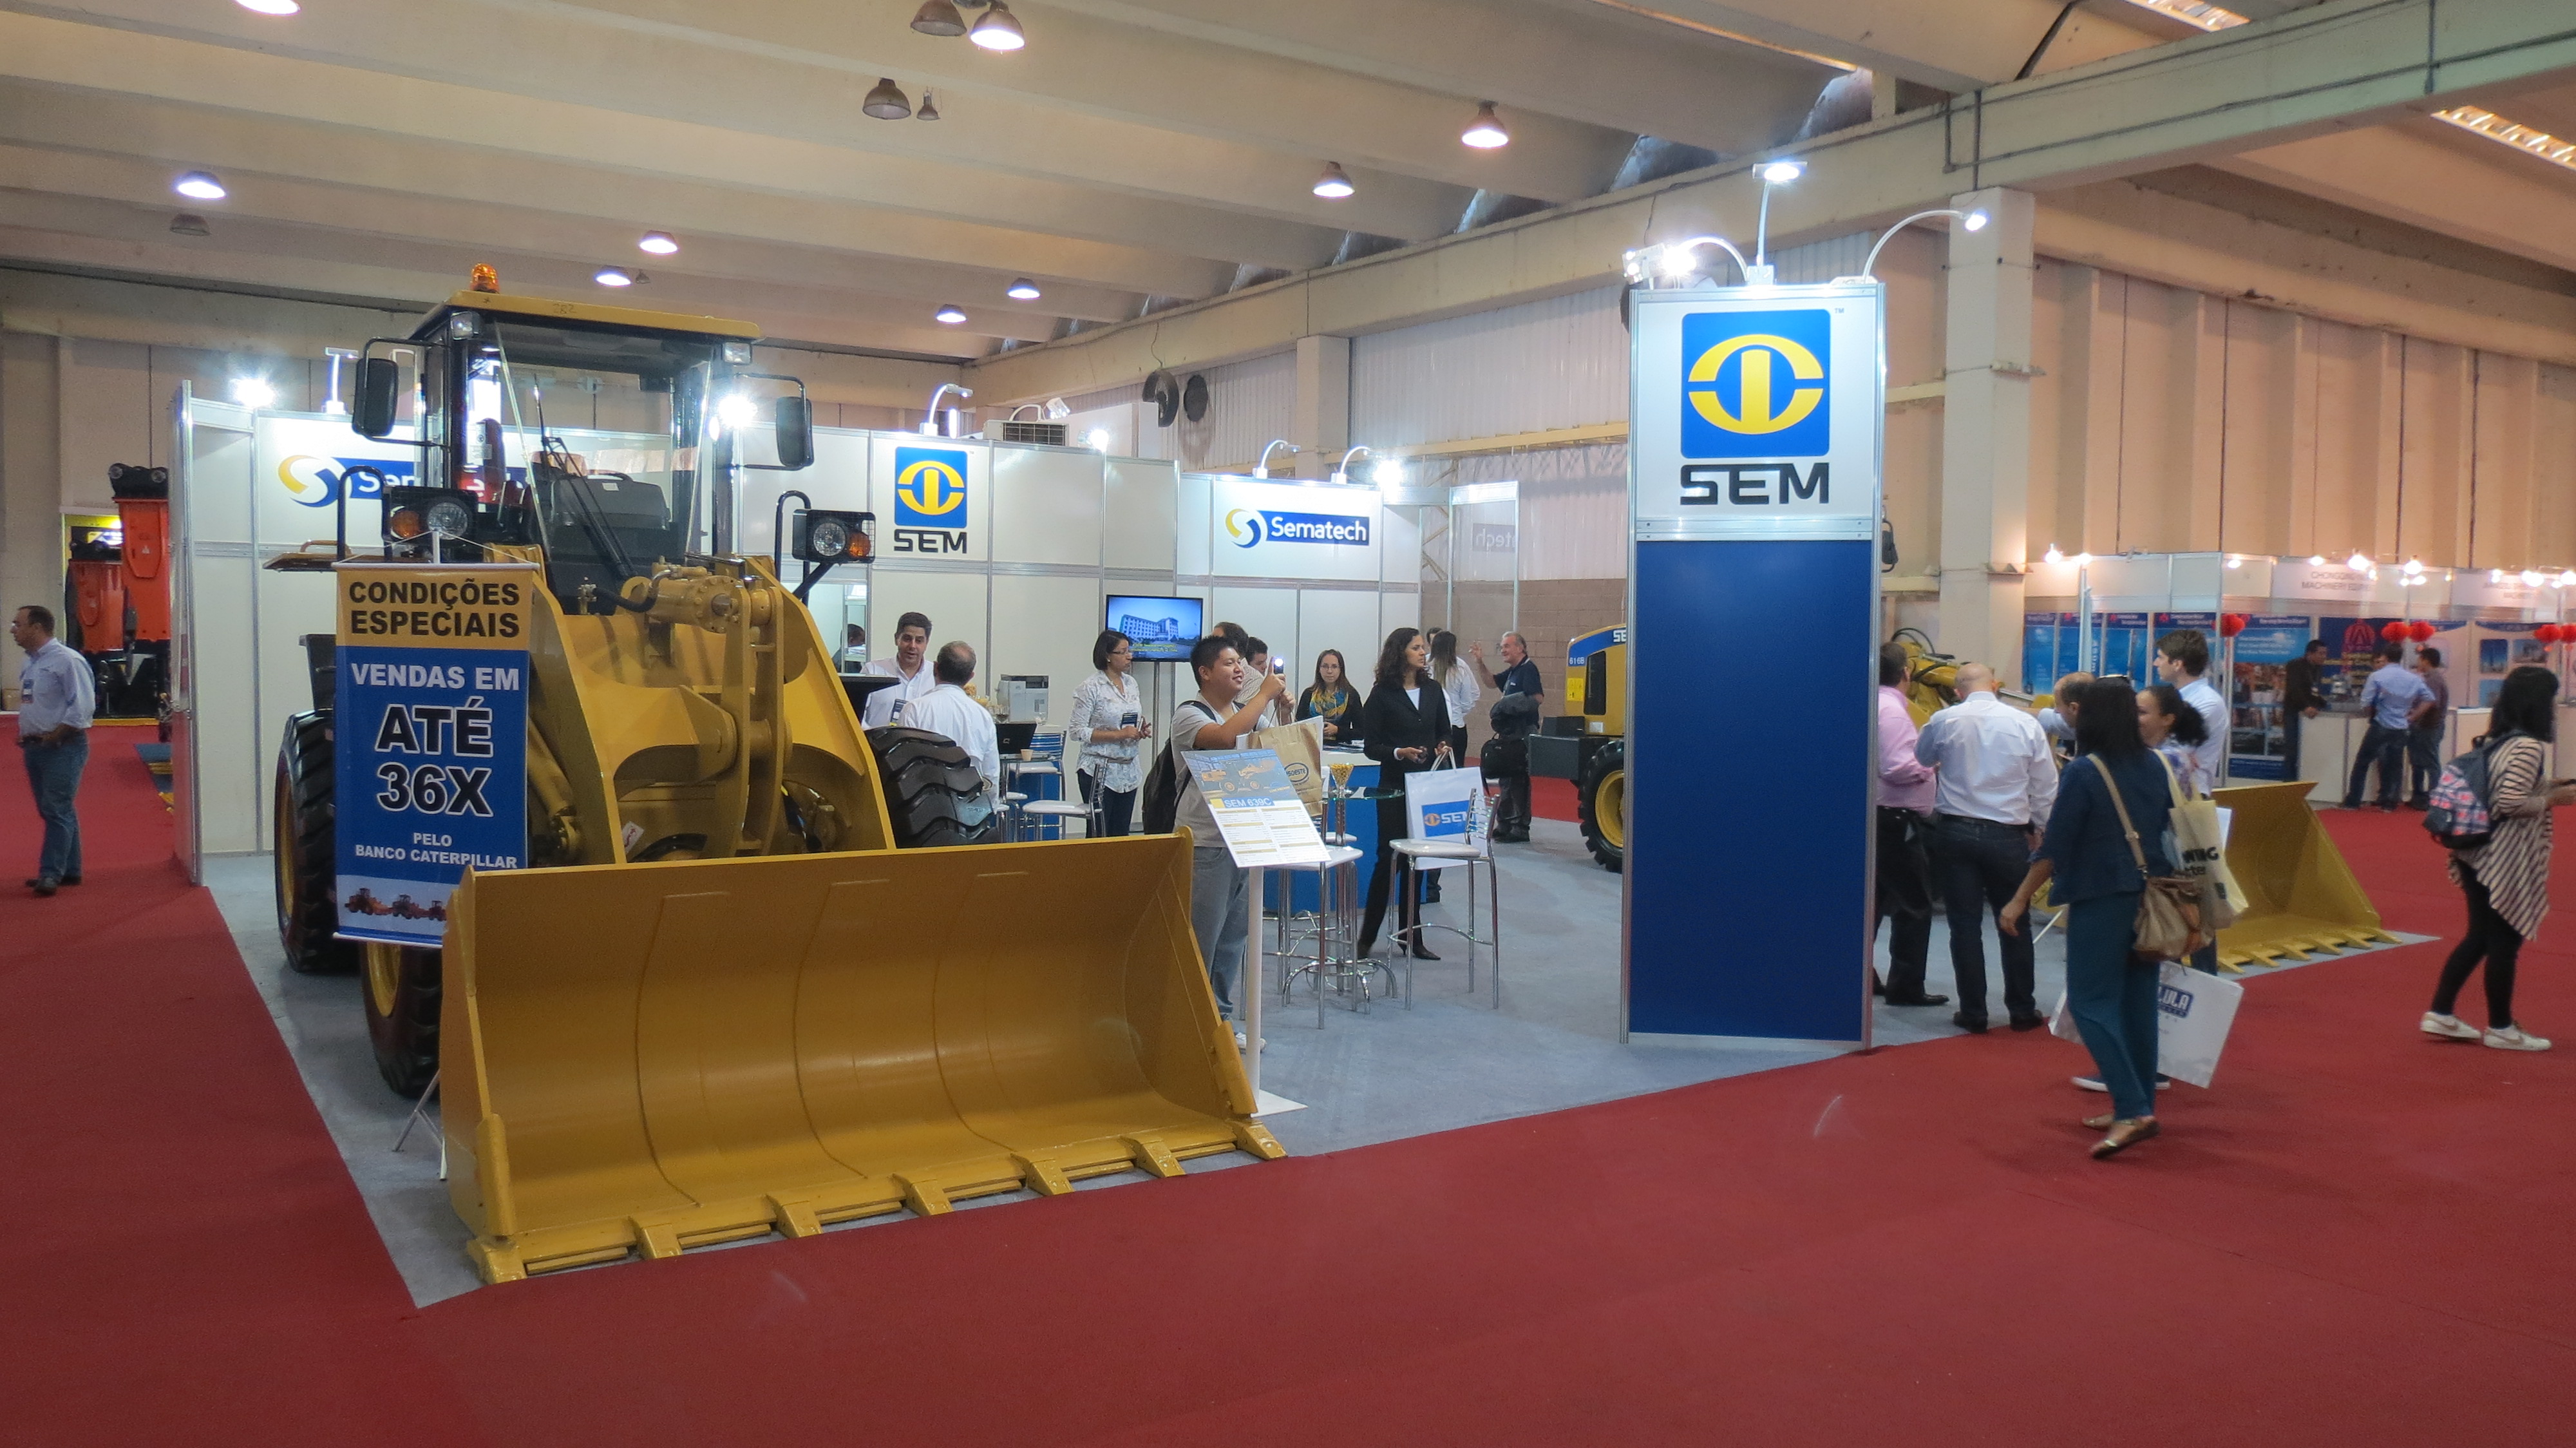 Construction Expo 2013 in Brazil